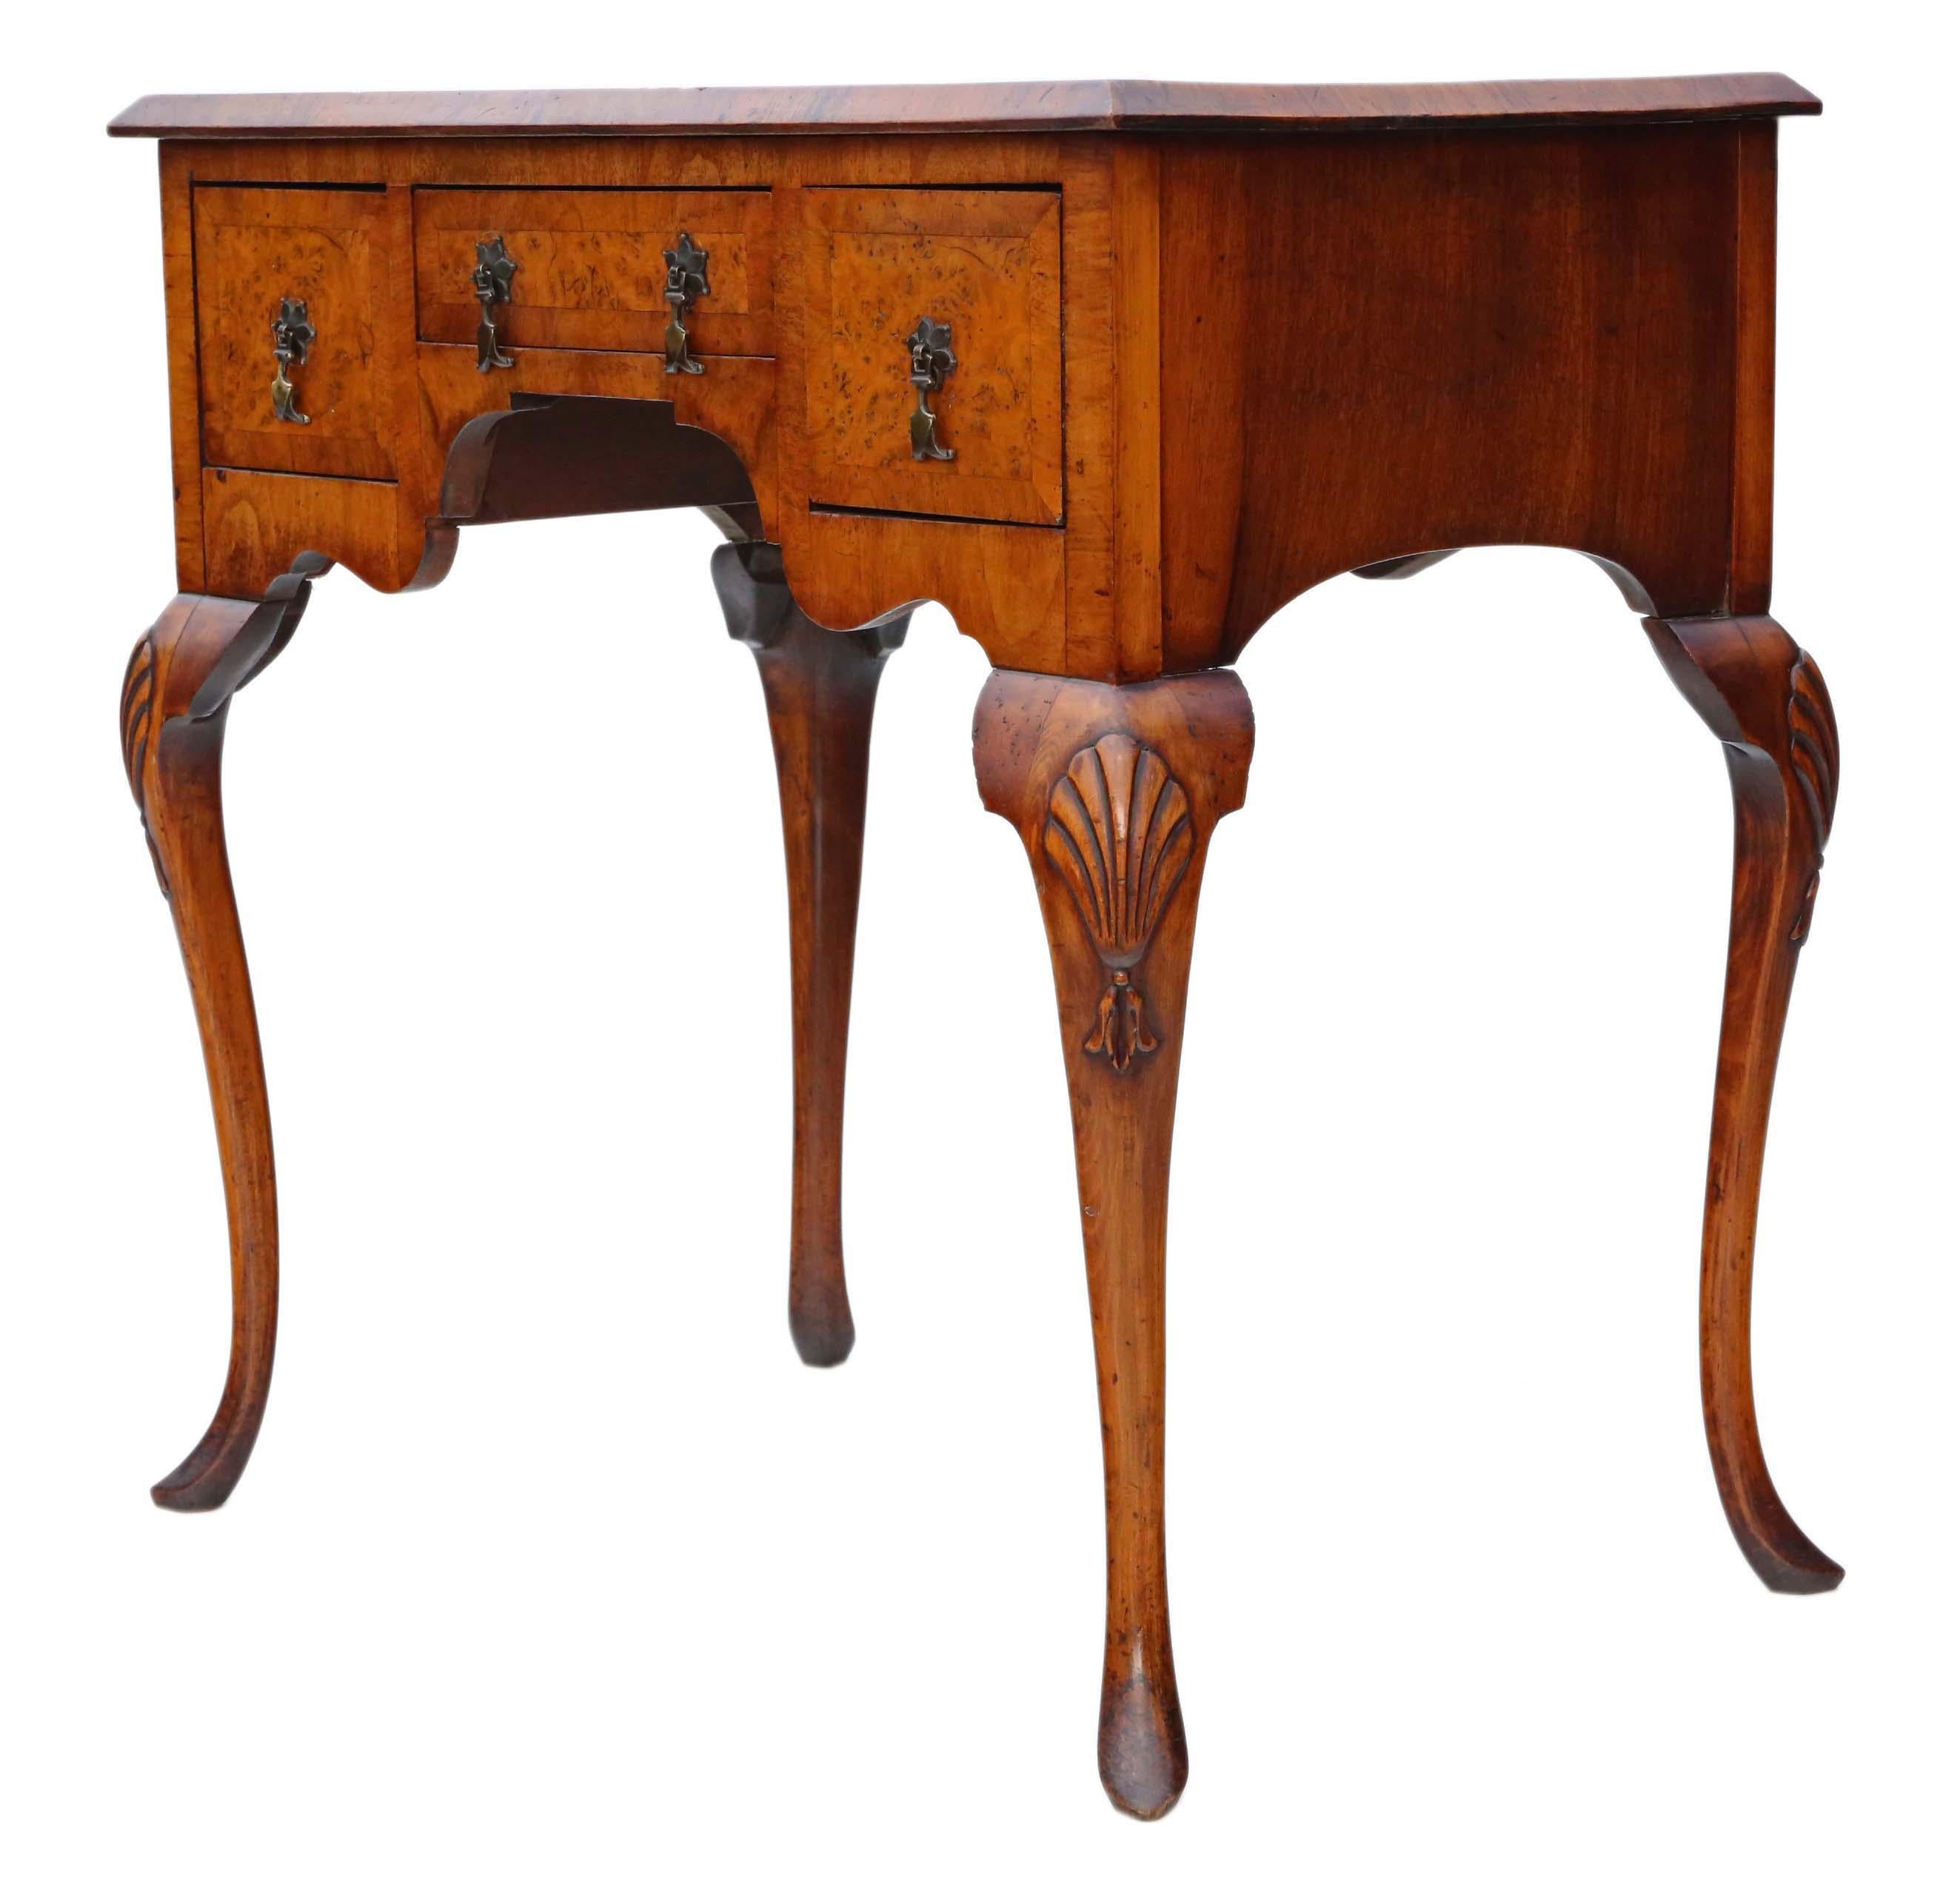 Early 20th Century Georgian Revival Walnut Lowboy Writing Side Table of Antique Quality from circa 